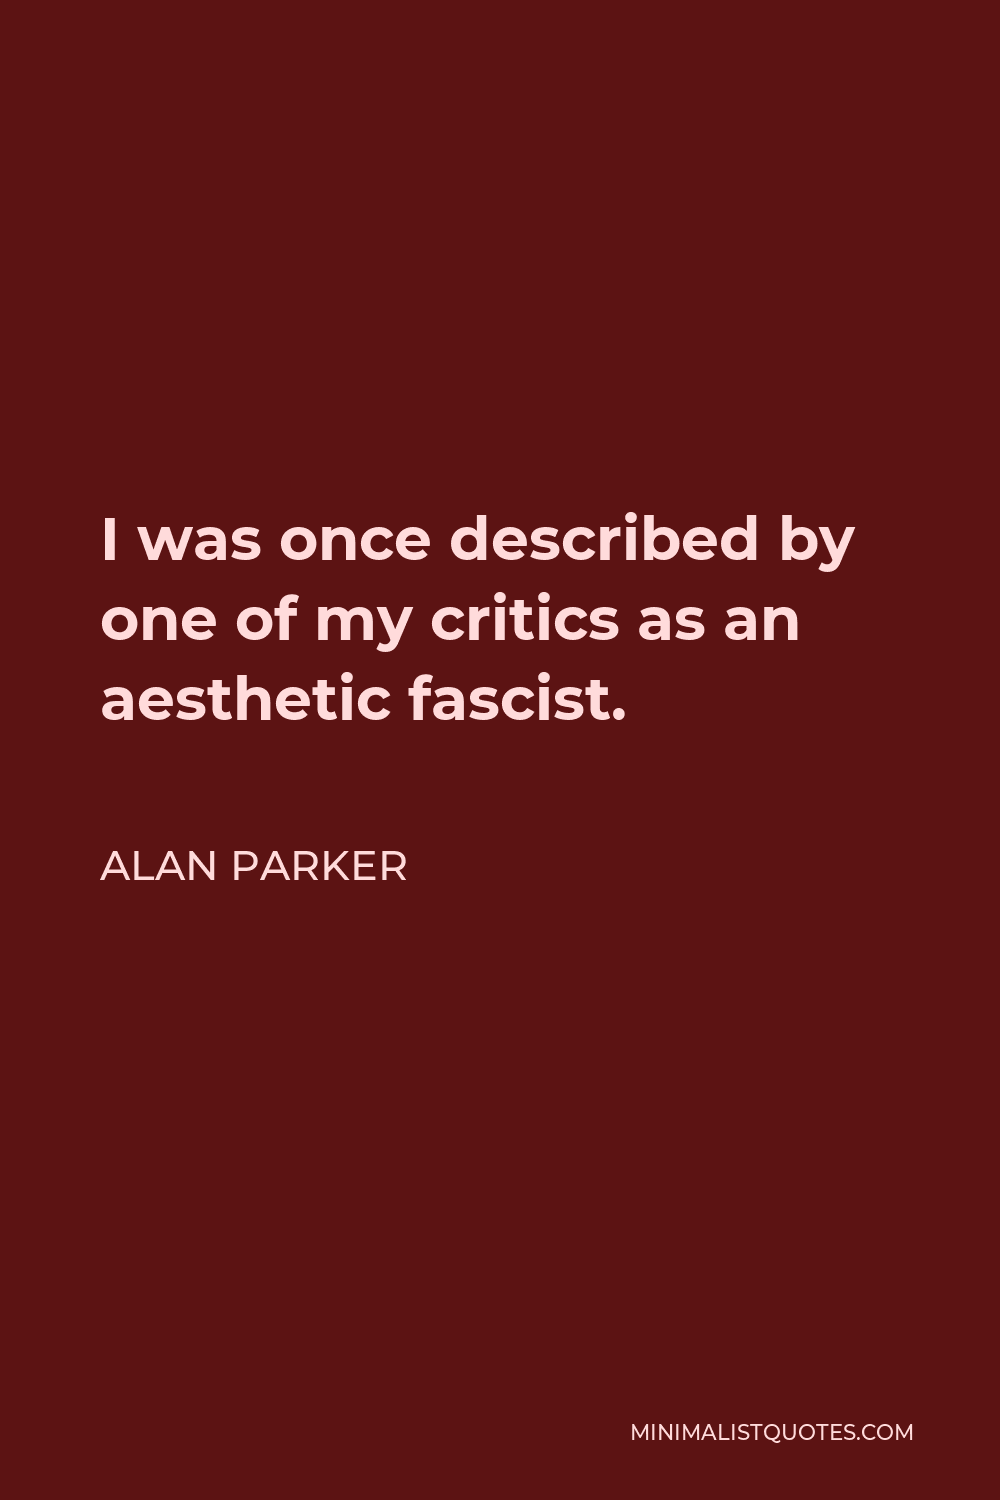 Alan Parker Quote - I was once described by one of my critics as an aesthetic fascist.